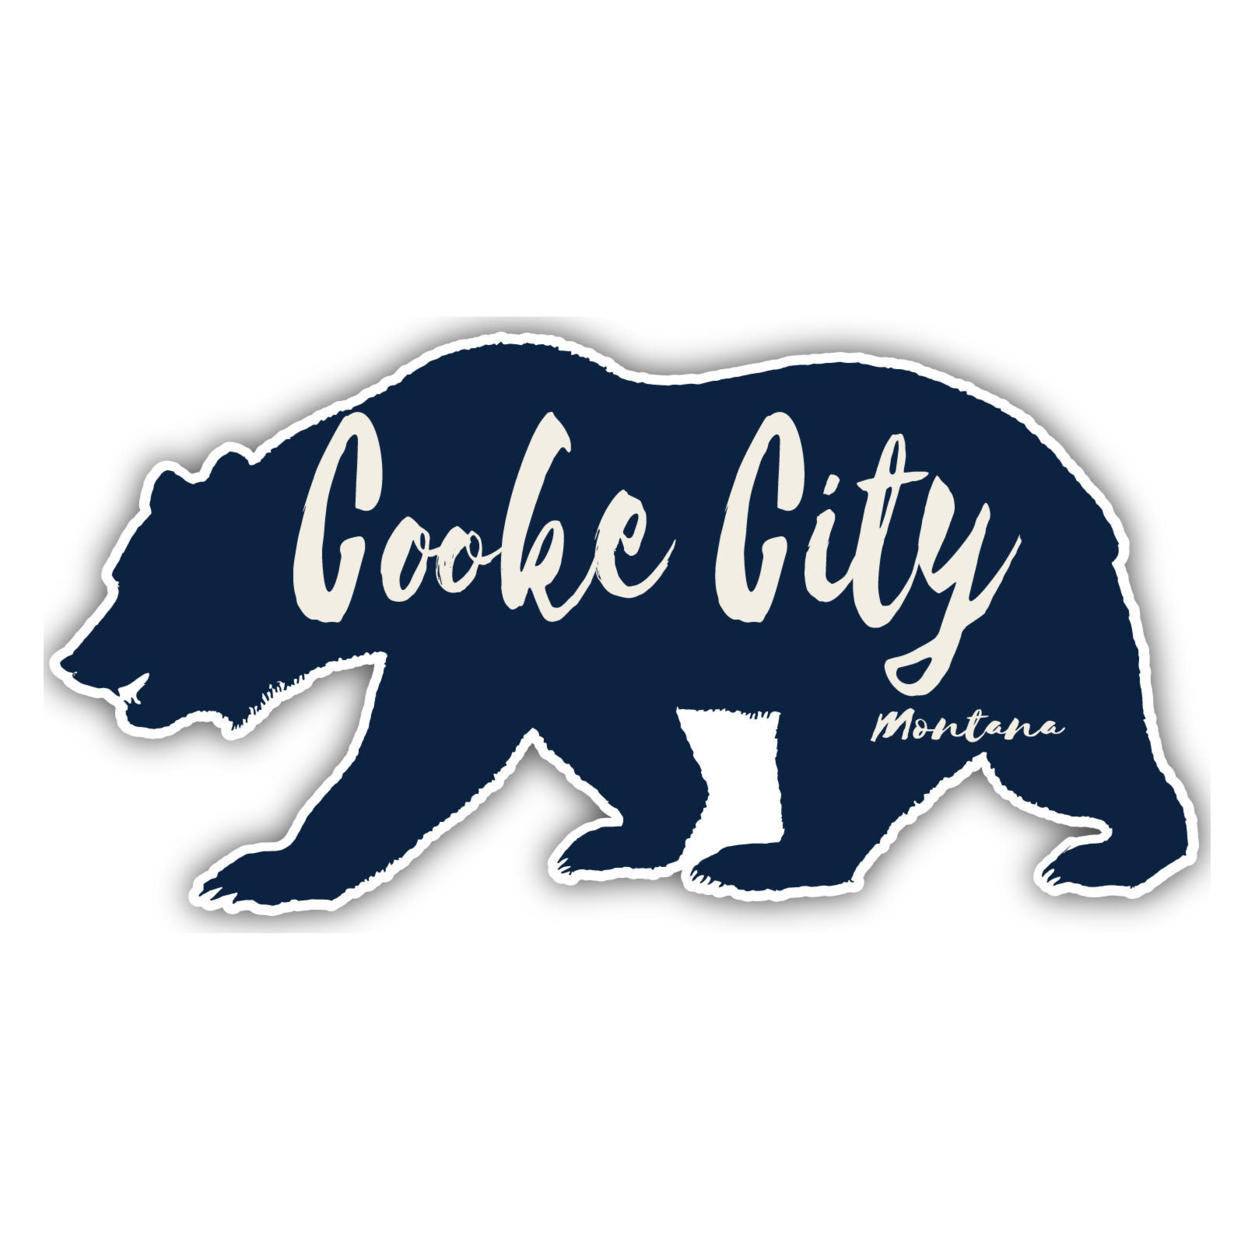 Cooke City Montana Souvenir Decorative Stickers (Choose Theme And Size) - 4-Pack, 2-Inch, Bear